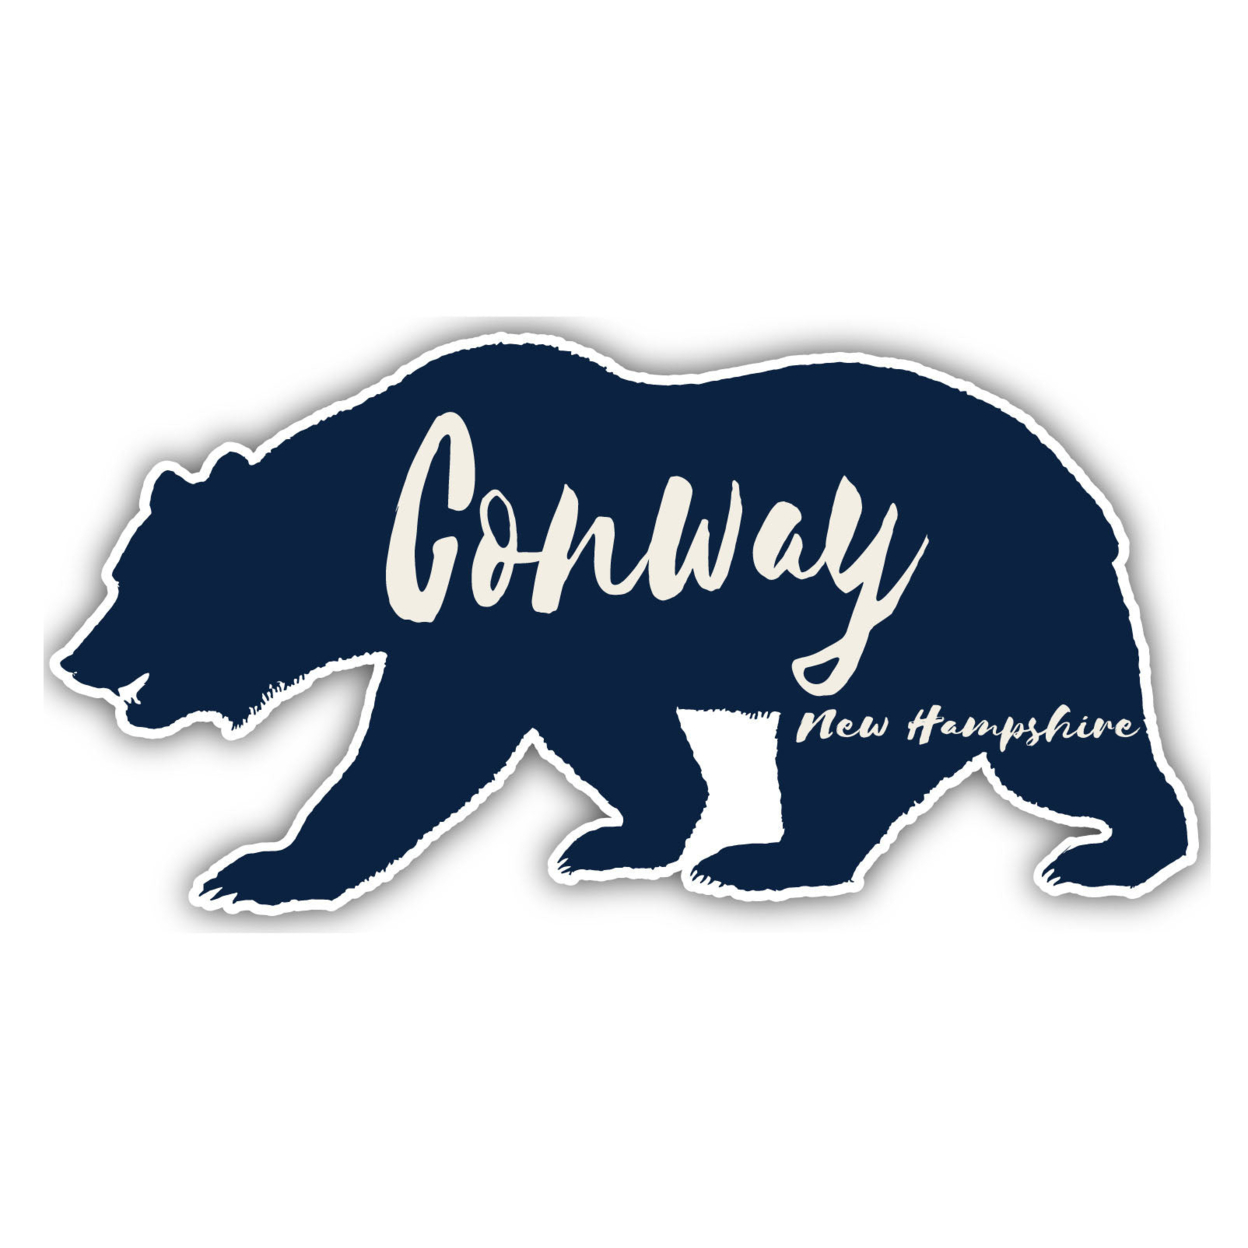 Conway New Hampshire Souvenir Decorative Stickers (Choose Theme And Size) - 4-Pack, 6-Inch, Bear